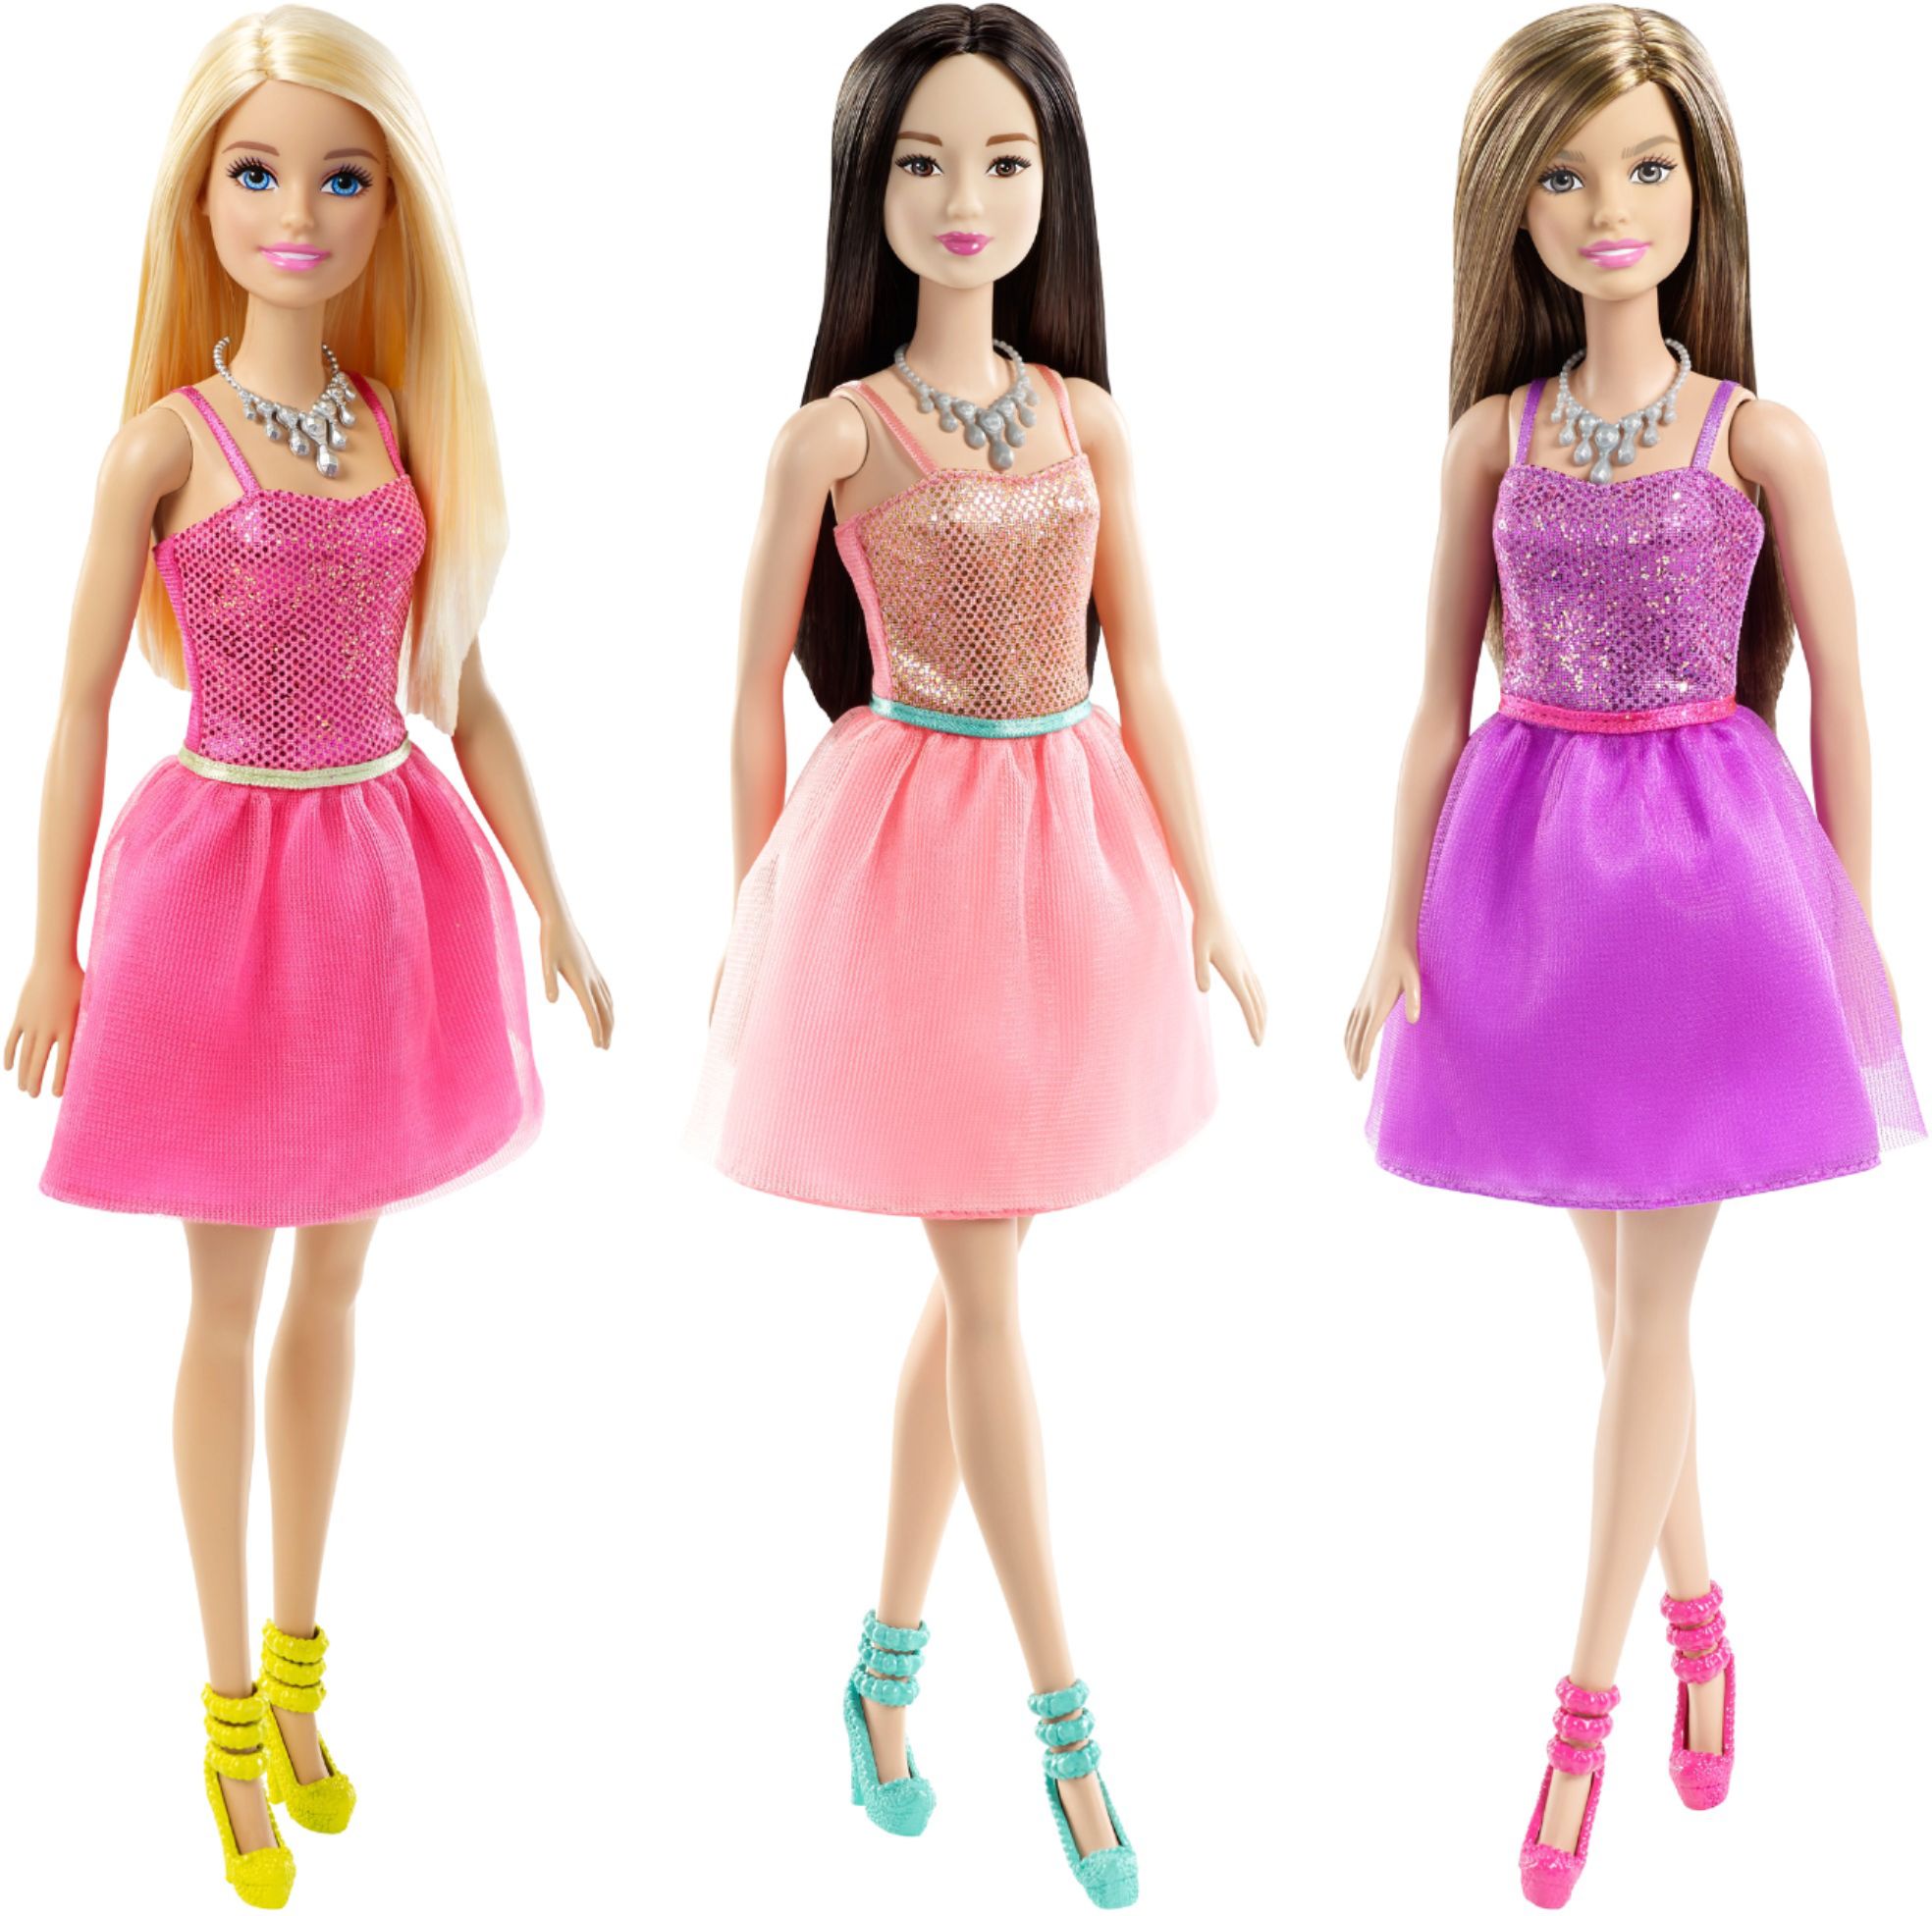 New Barbie Fashionista Dolls - A Makeover for Barbie - Frolicious